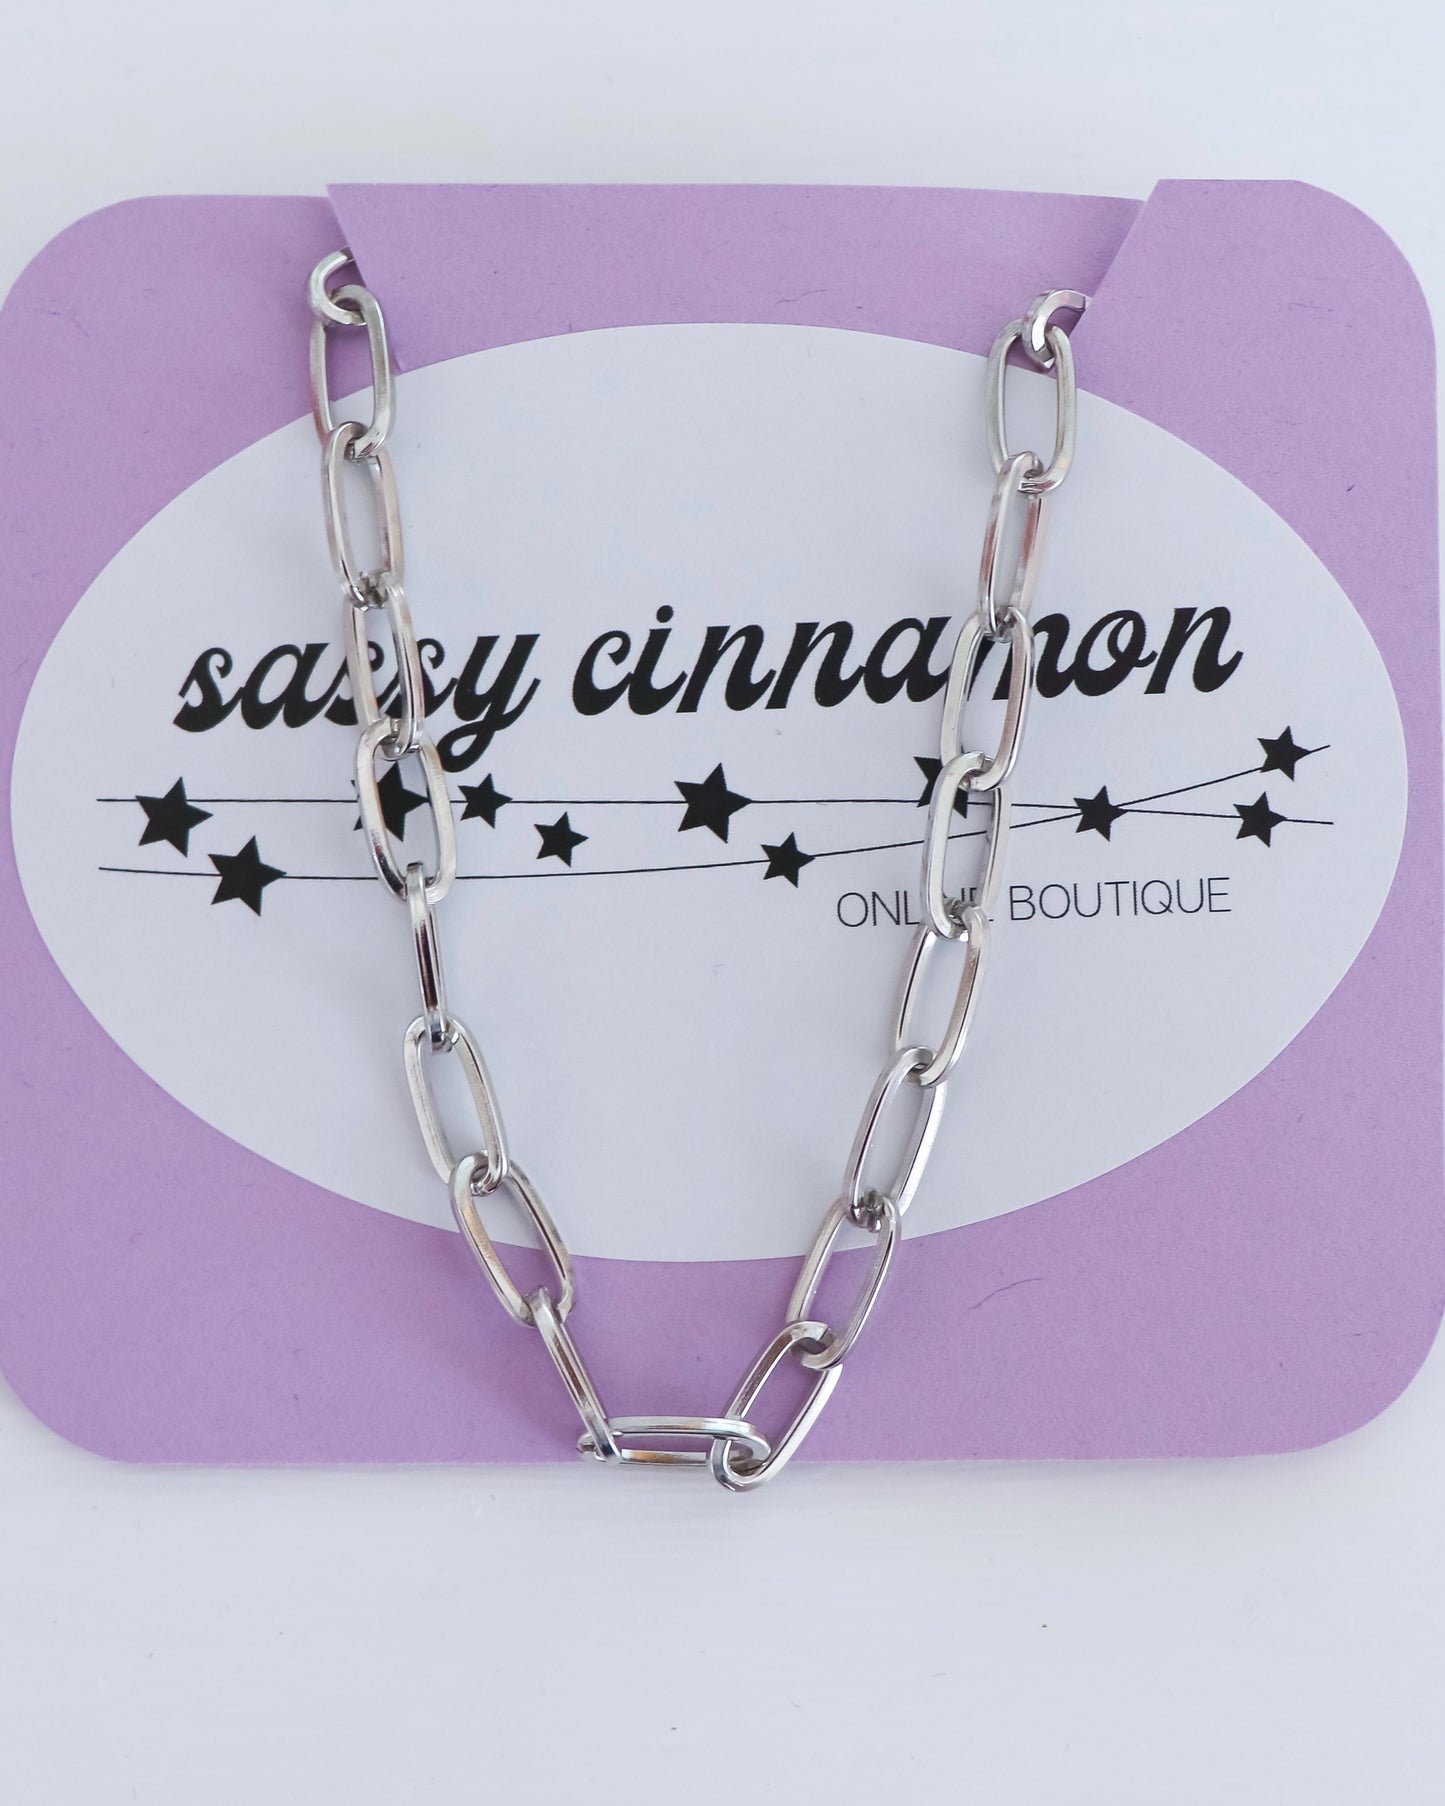 Chain Link Necklace - Silver